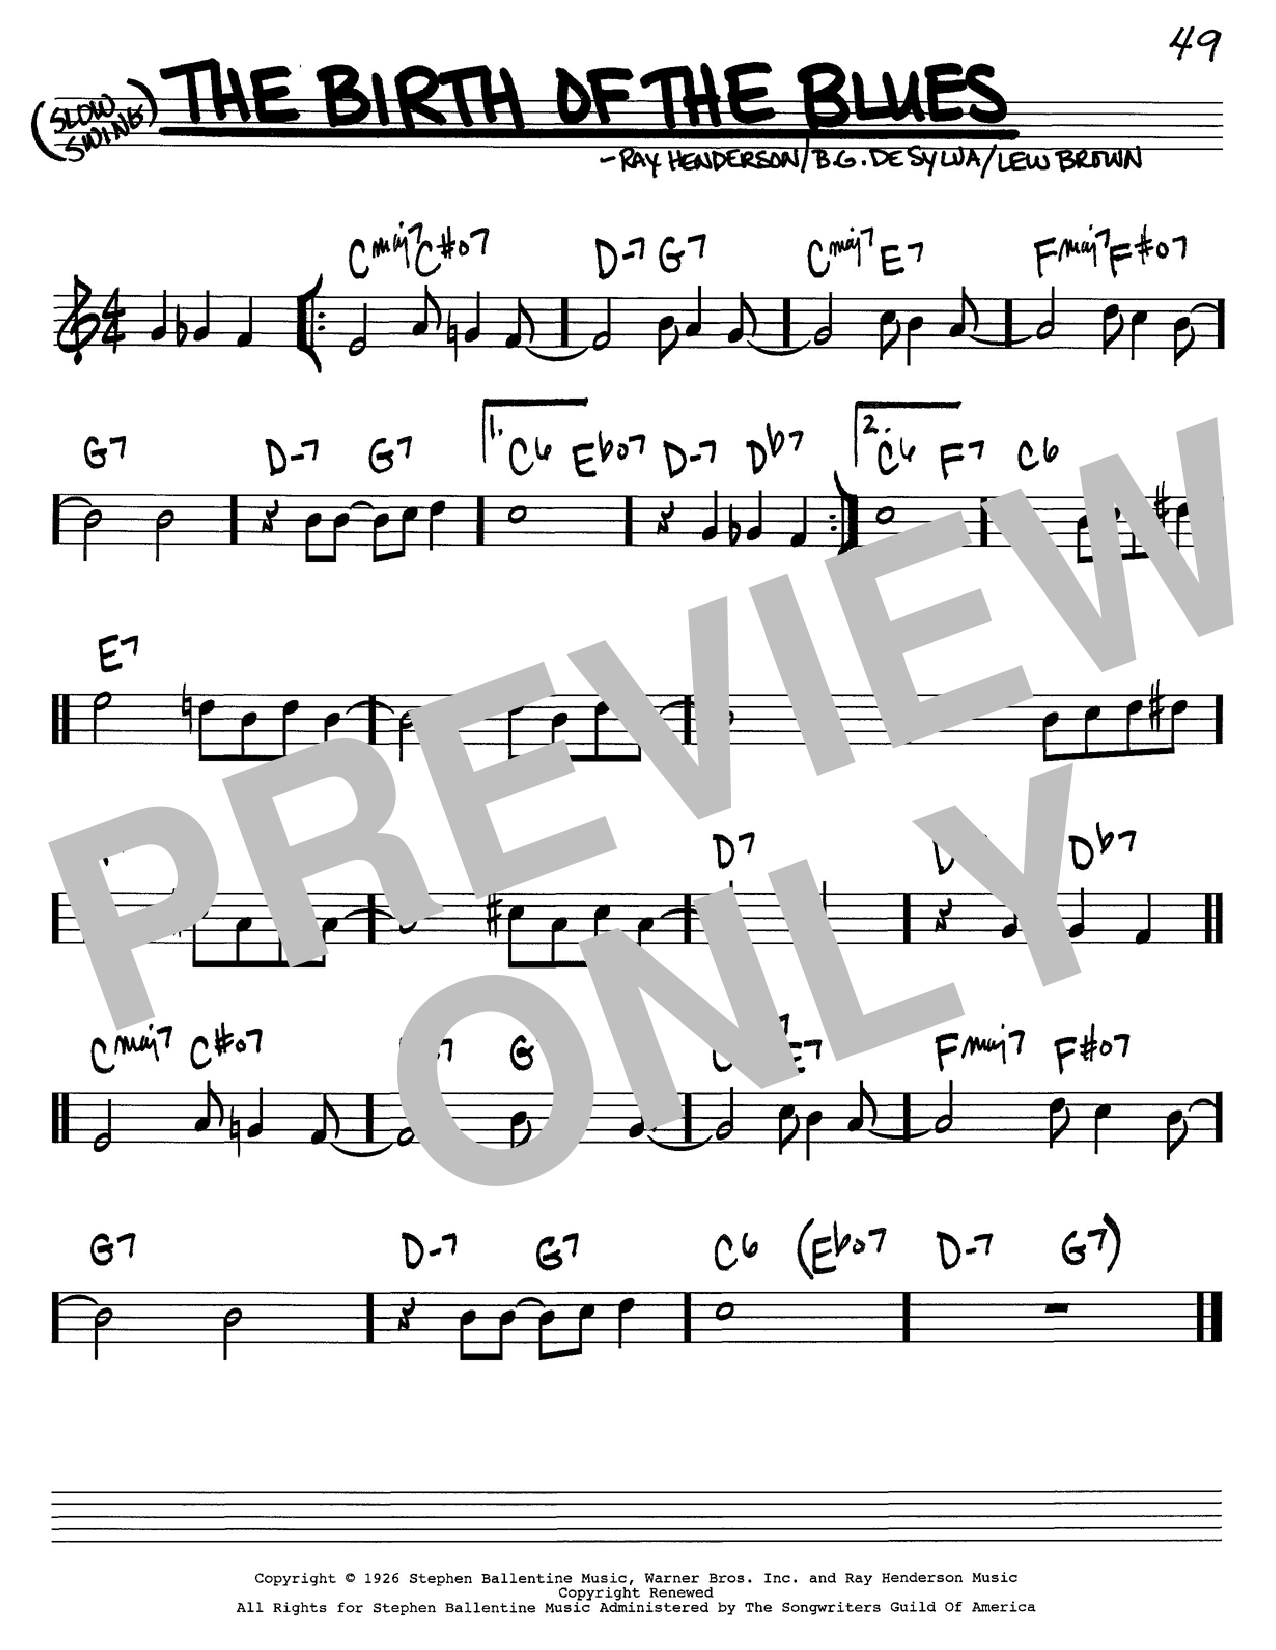 Lew Brown The Birth Of The Blues Sheet Music Notes Download Printable Pdf Score 182122 8709